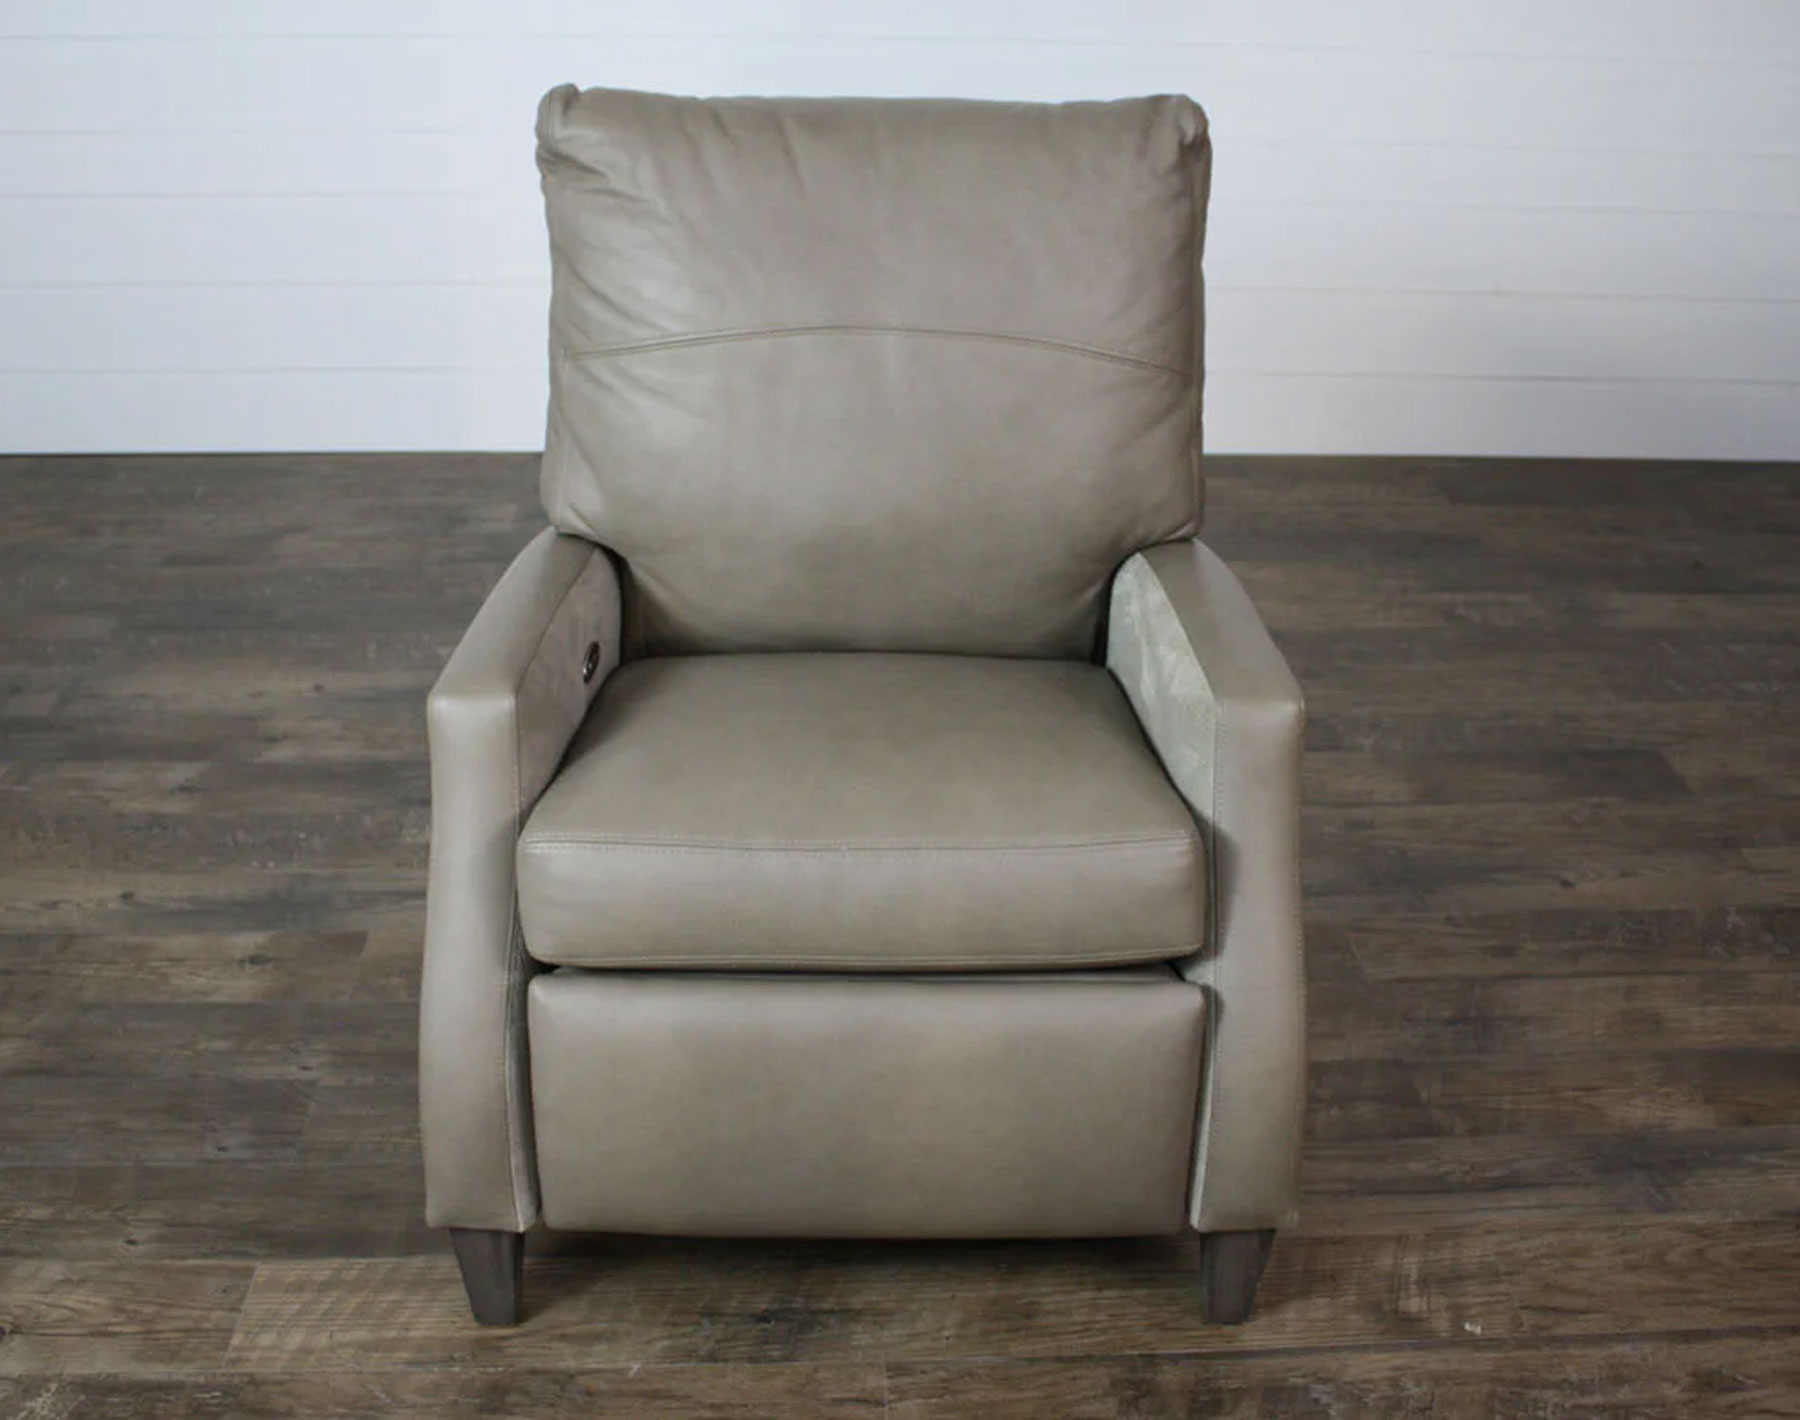 Leathercraft 1777 Cogburn Recliner in Aspen Toasty Leather with Fabric Accents